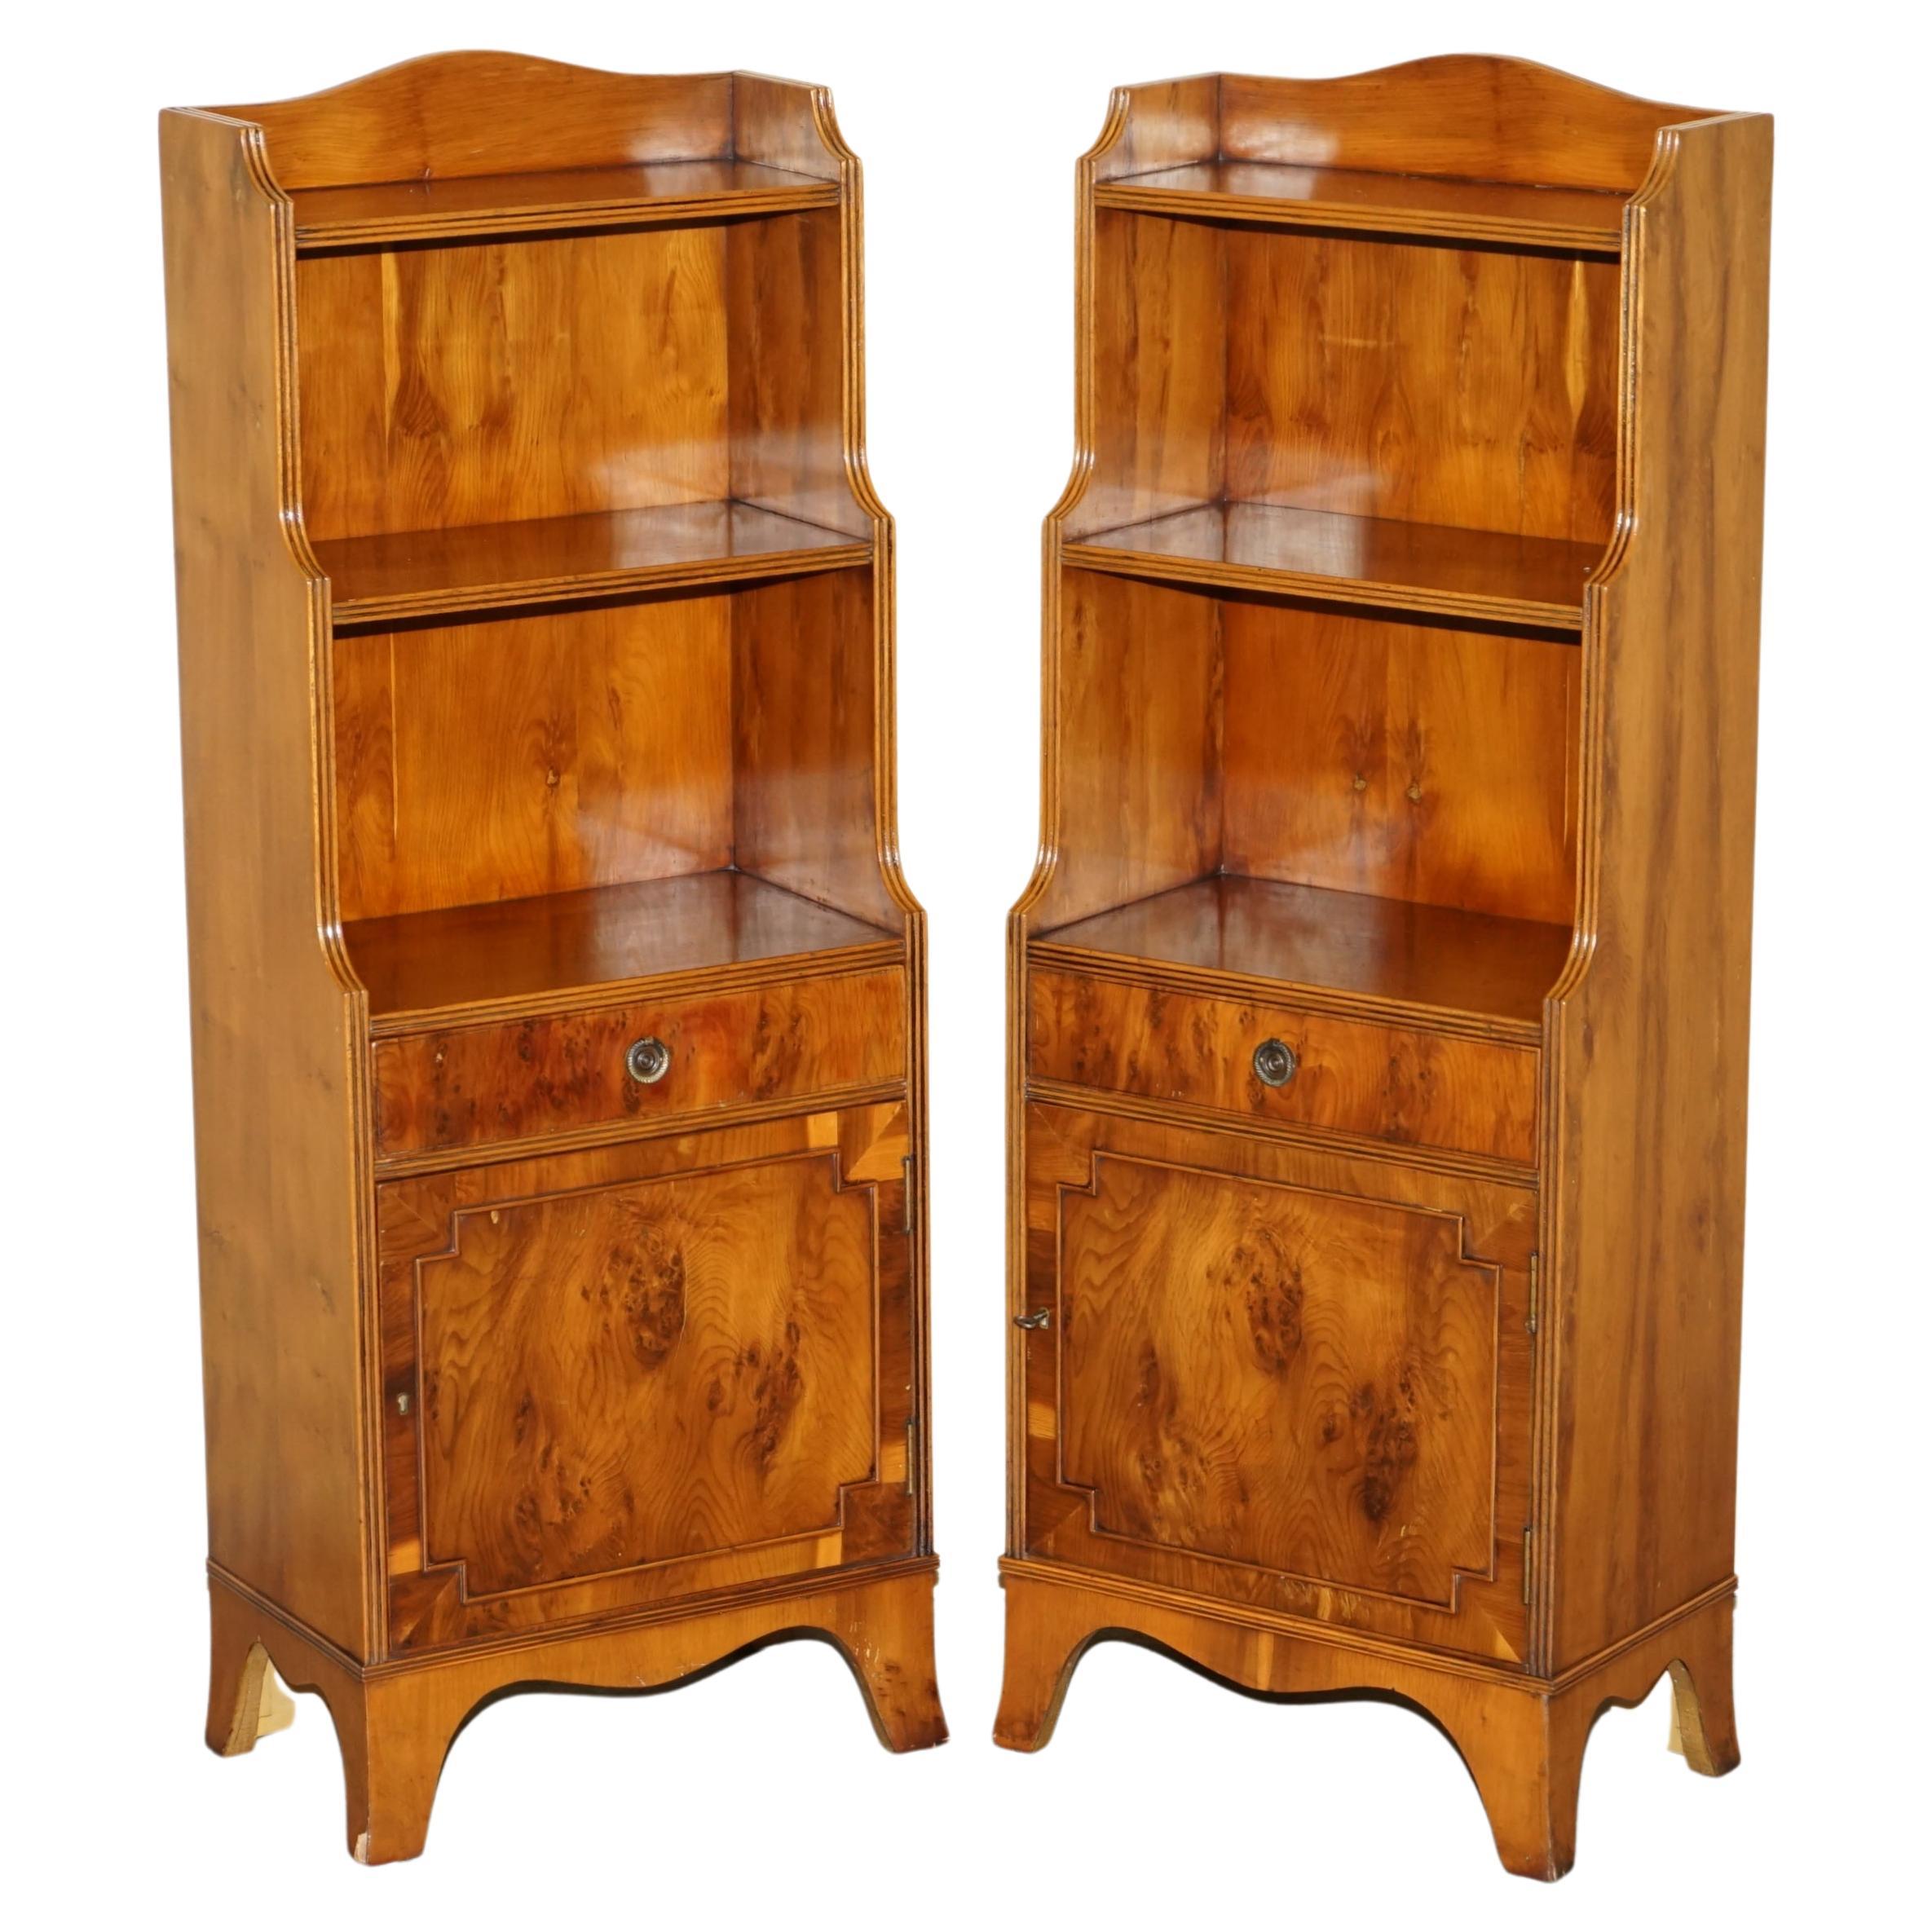 PAIR OF ViNTAGE ENGLISH FLAMED HARDWOOD WATERFALL BOOKCASES WITH CUPBOARD BASES